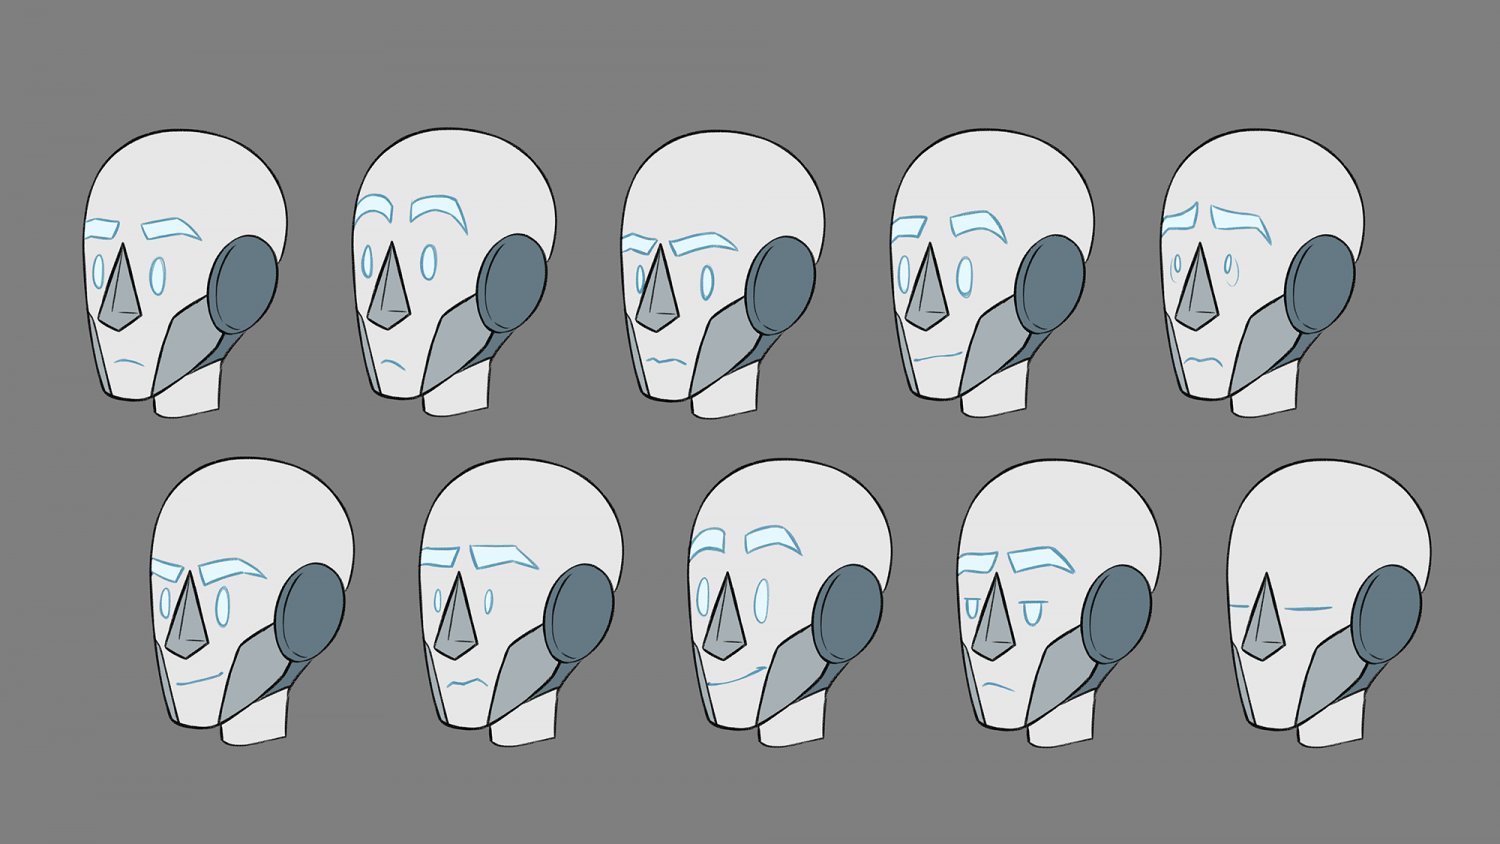 A set of ten facial expressions for the character Logan, showing a range of emotions like joy, anger, sadness, shock, and contentment.